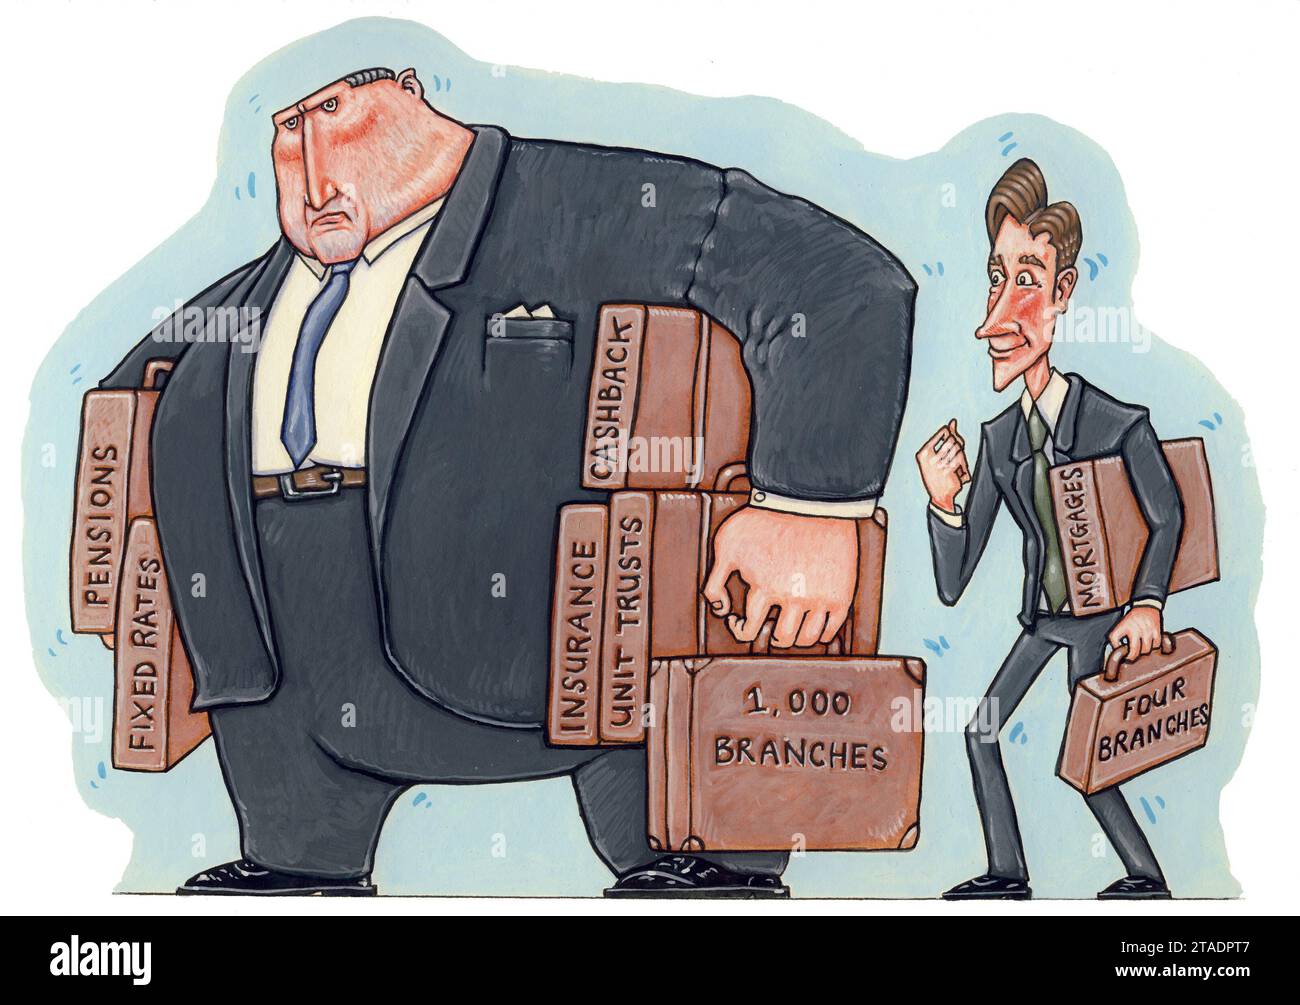 Art, banking finance man with many portfolios, representing a large bank, verses a smaller man with two portfolios, competition efficiency, downsizing Stock Photo